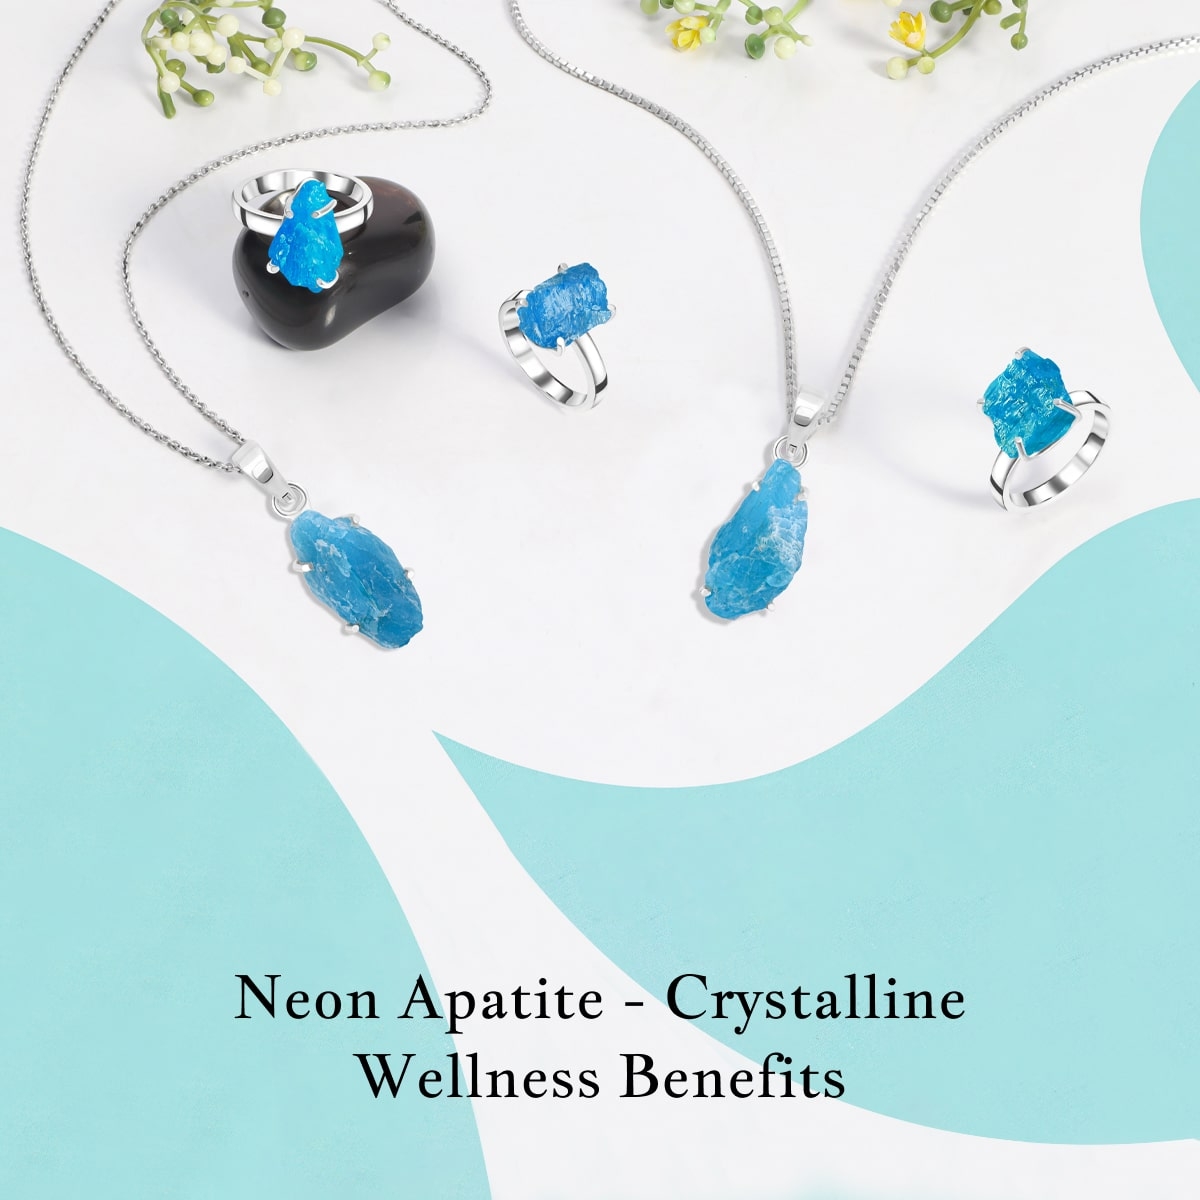 Benefits of Neon Apatite Crystal